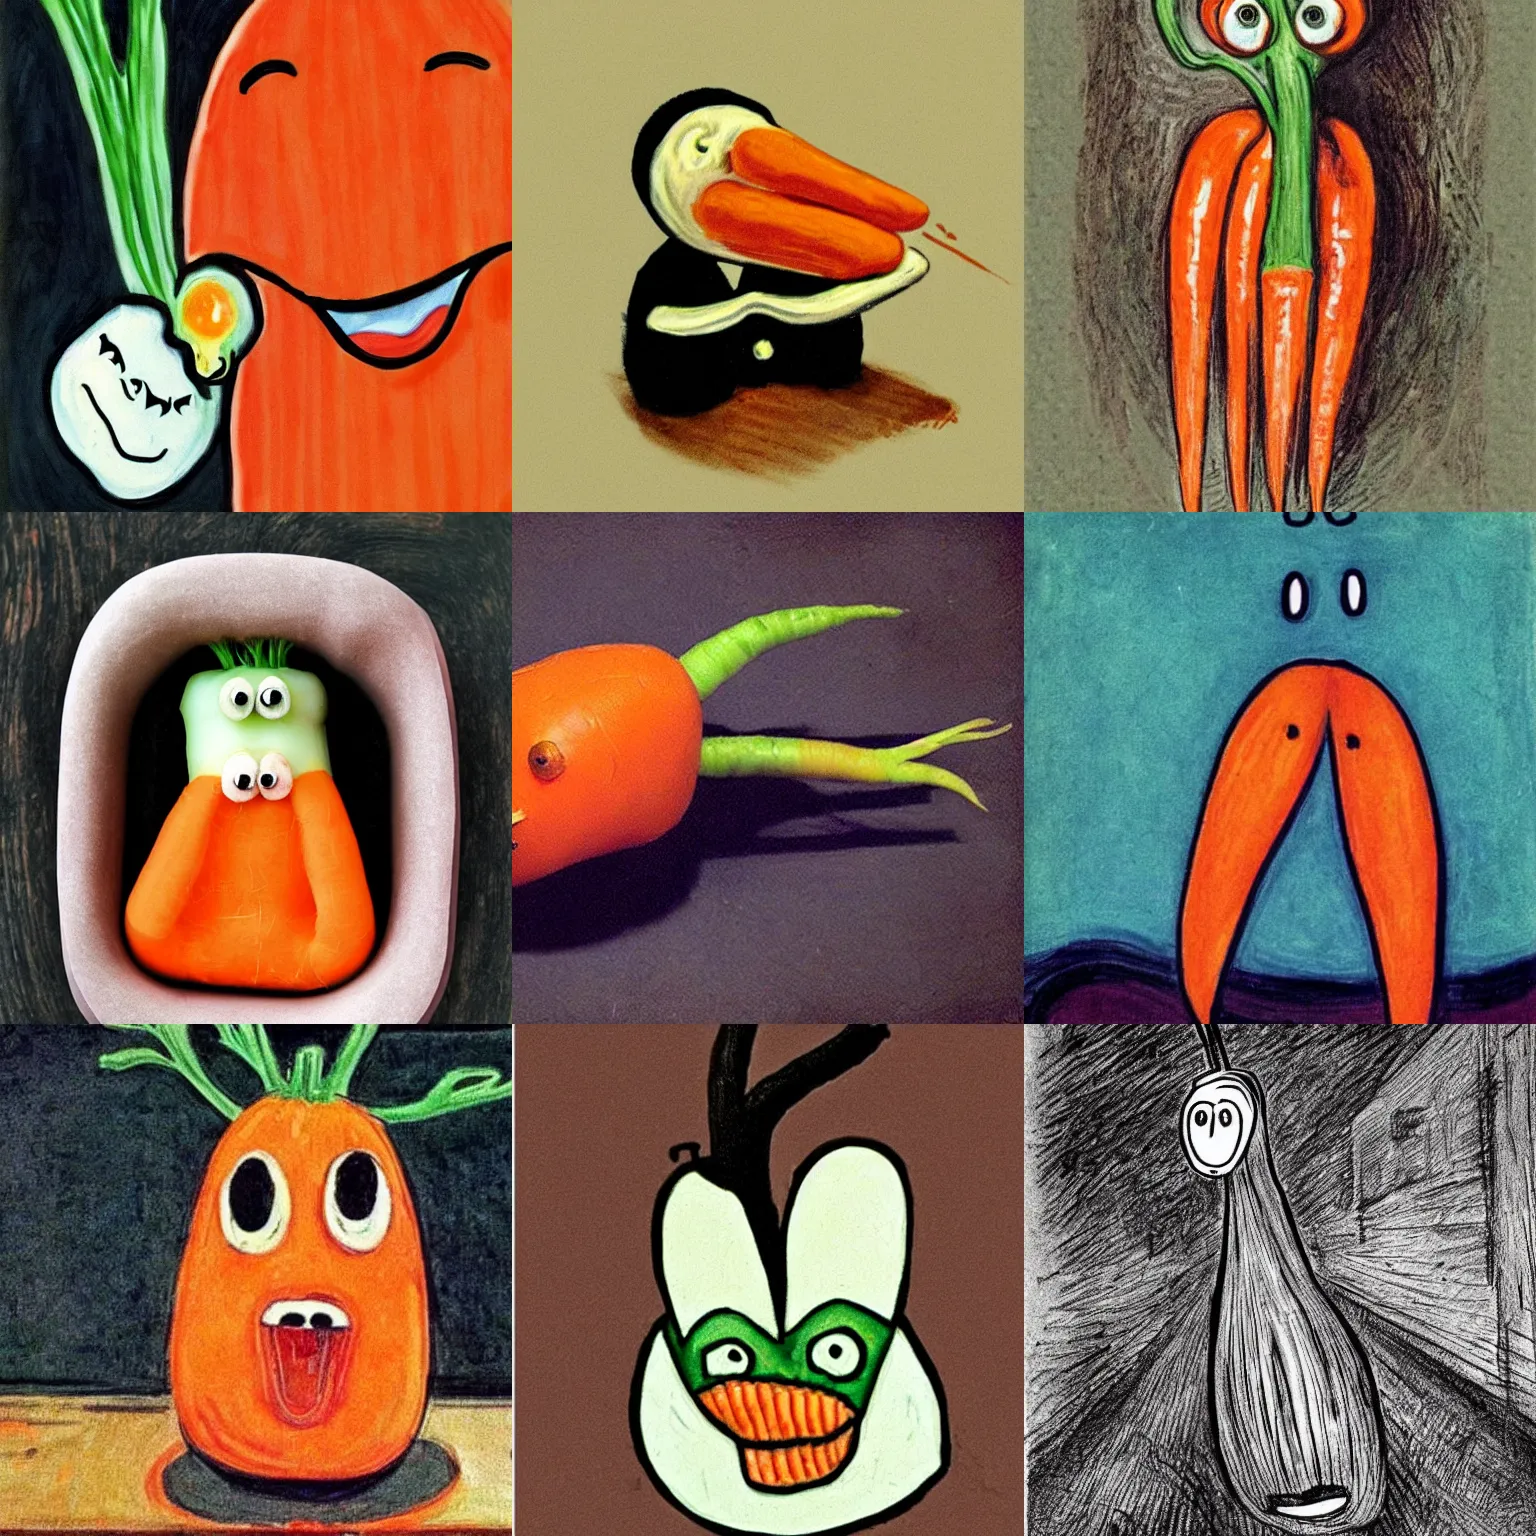 Prompt: a scary carrot designed by Edvard Munch